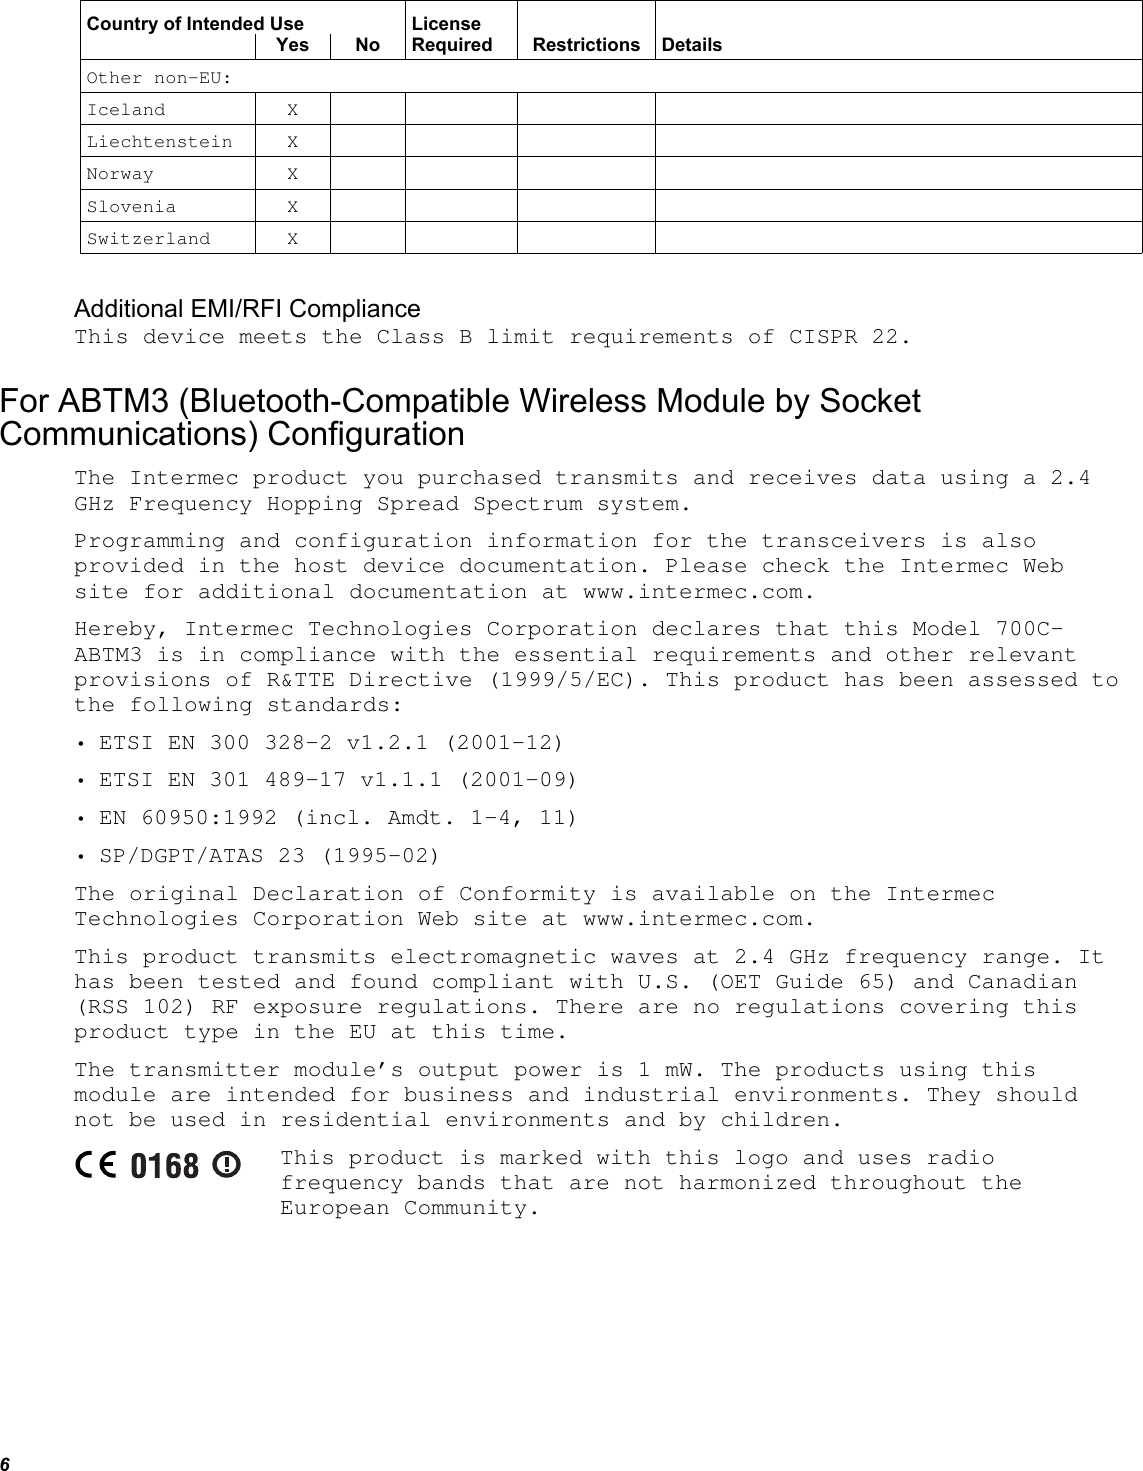 6  Country of Intended Use  License       Yes No Required Restrictions Details Other non-EU:        Iceland X      Liechtenstein X         Norway X     Slovenia X      Switzerland X              Additional EMI/RFI Compliance This device meets the Class B limit requirements of CISPR 22. For ABTM3 (Bluetooth-Compatible Wireless Module by Socket Communications) Configuration The Intermec product you purchased transmits and receives data using a 2.4 GHz Frequency Hopping Spread Spectrum system. Programming and configuration information for the transceivers is also provided in the host device documentation. Please check the Intermec Web site for additional documentation at www.intermec.com. Hereby, Intermec Technologies Corporation declares that this Model 700C-ABTM3 is in compliance with the essential requirements and other relevant provisions of R&amp;TTE Directive (1999/5/EC). This product has been assessed to the following standards: • ETSI EN 300 328-2 v1.2.1 (2001-12) • ETSI EN 301 489-17 v1.1.1 (2001-09) • EN 60950:1992 (incl. Amdt. 1-4, 11) • SP/DGPT/ATAS 23 (1995-02) The original Declaration of Conformity is available on the Intermec Technologies Corporation Web site at www.intermec.com. This product transmits electromagnetic waves at 2.4 GHz frequency range. It has been tested and found compliant with U.S. (OET Guide 65) and Canadian (RSS 102) RF exposure regulations. There are no regulations covering this product type in the EU at this time. The transmitter module’s output power is 1 mW. The products using this module are intended for business and industrial environments. They should not be used in residential environments and by children.  This product is marked with this logo and uses radio frequency bands that are not harmonized throughout the European Community.   